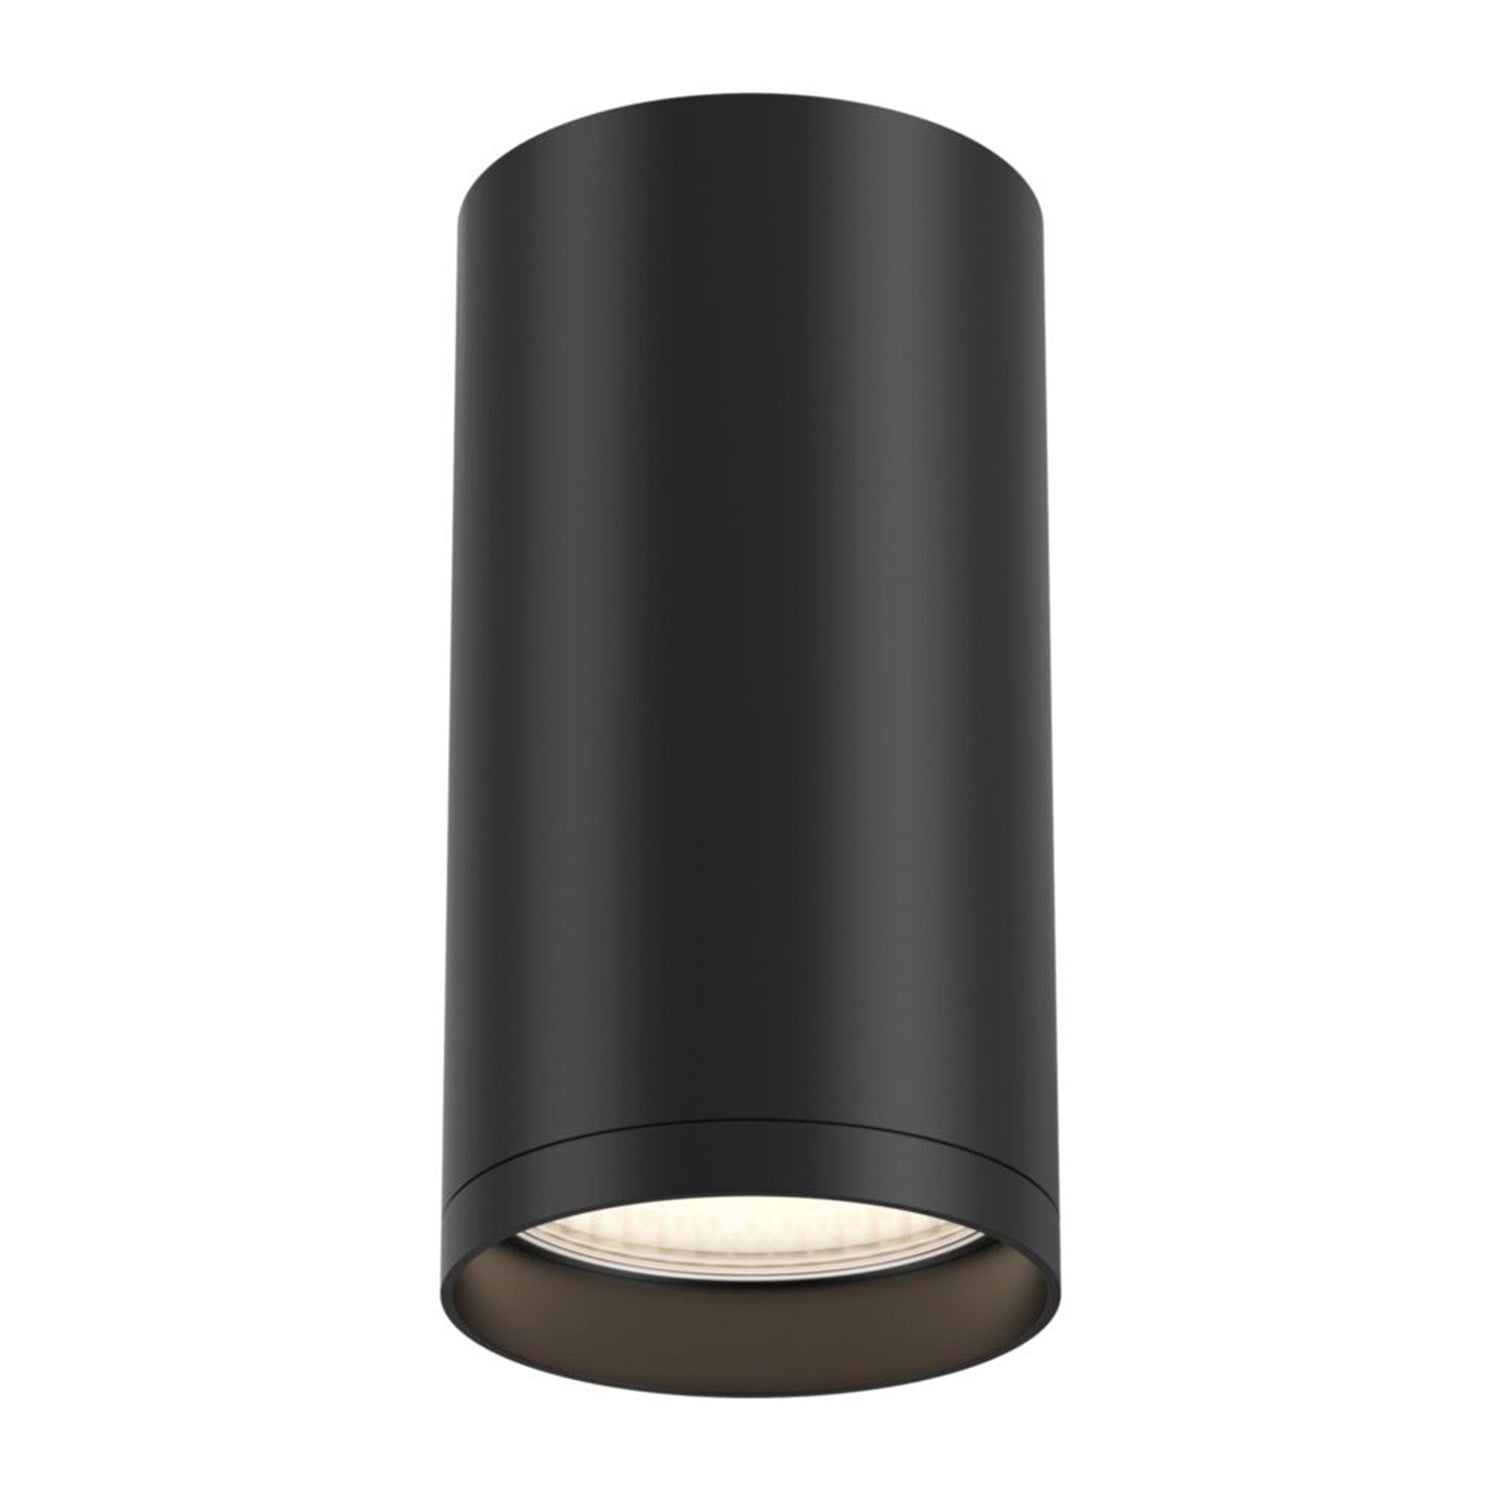 FOCUS S - Black, white or brass cylindrical surface-mounted spotlight